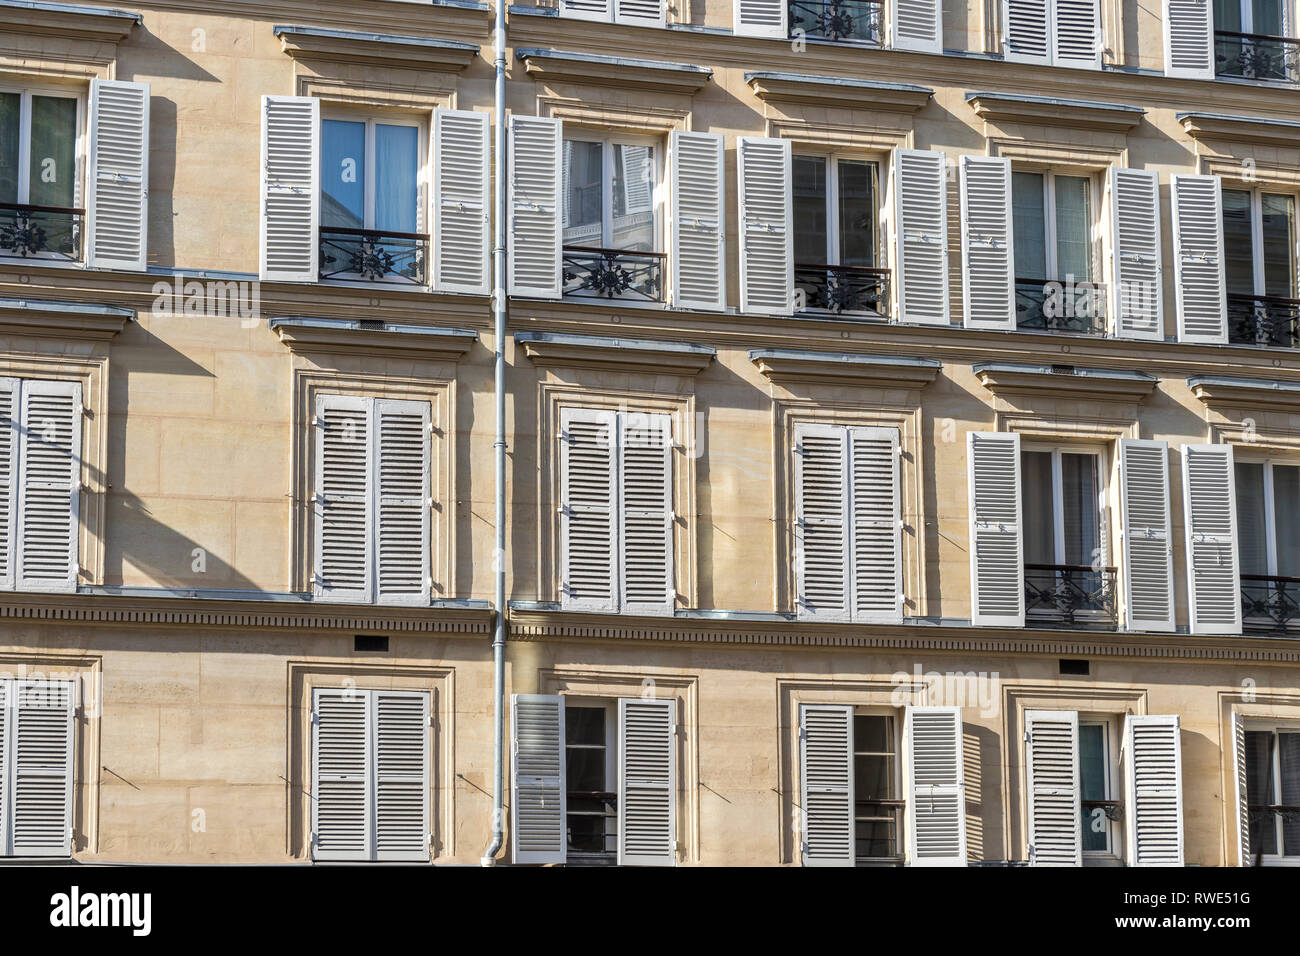 Paris apartments with wooden shutters on the windows in the sunshine ,Rue Notre Dame de Lorette,St Georges in the 9th arrondissement of Paris Stock Photo